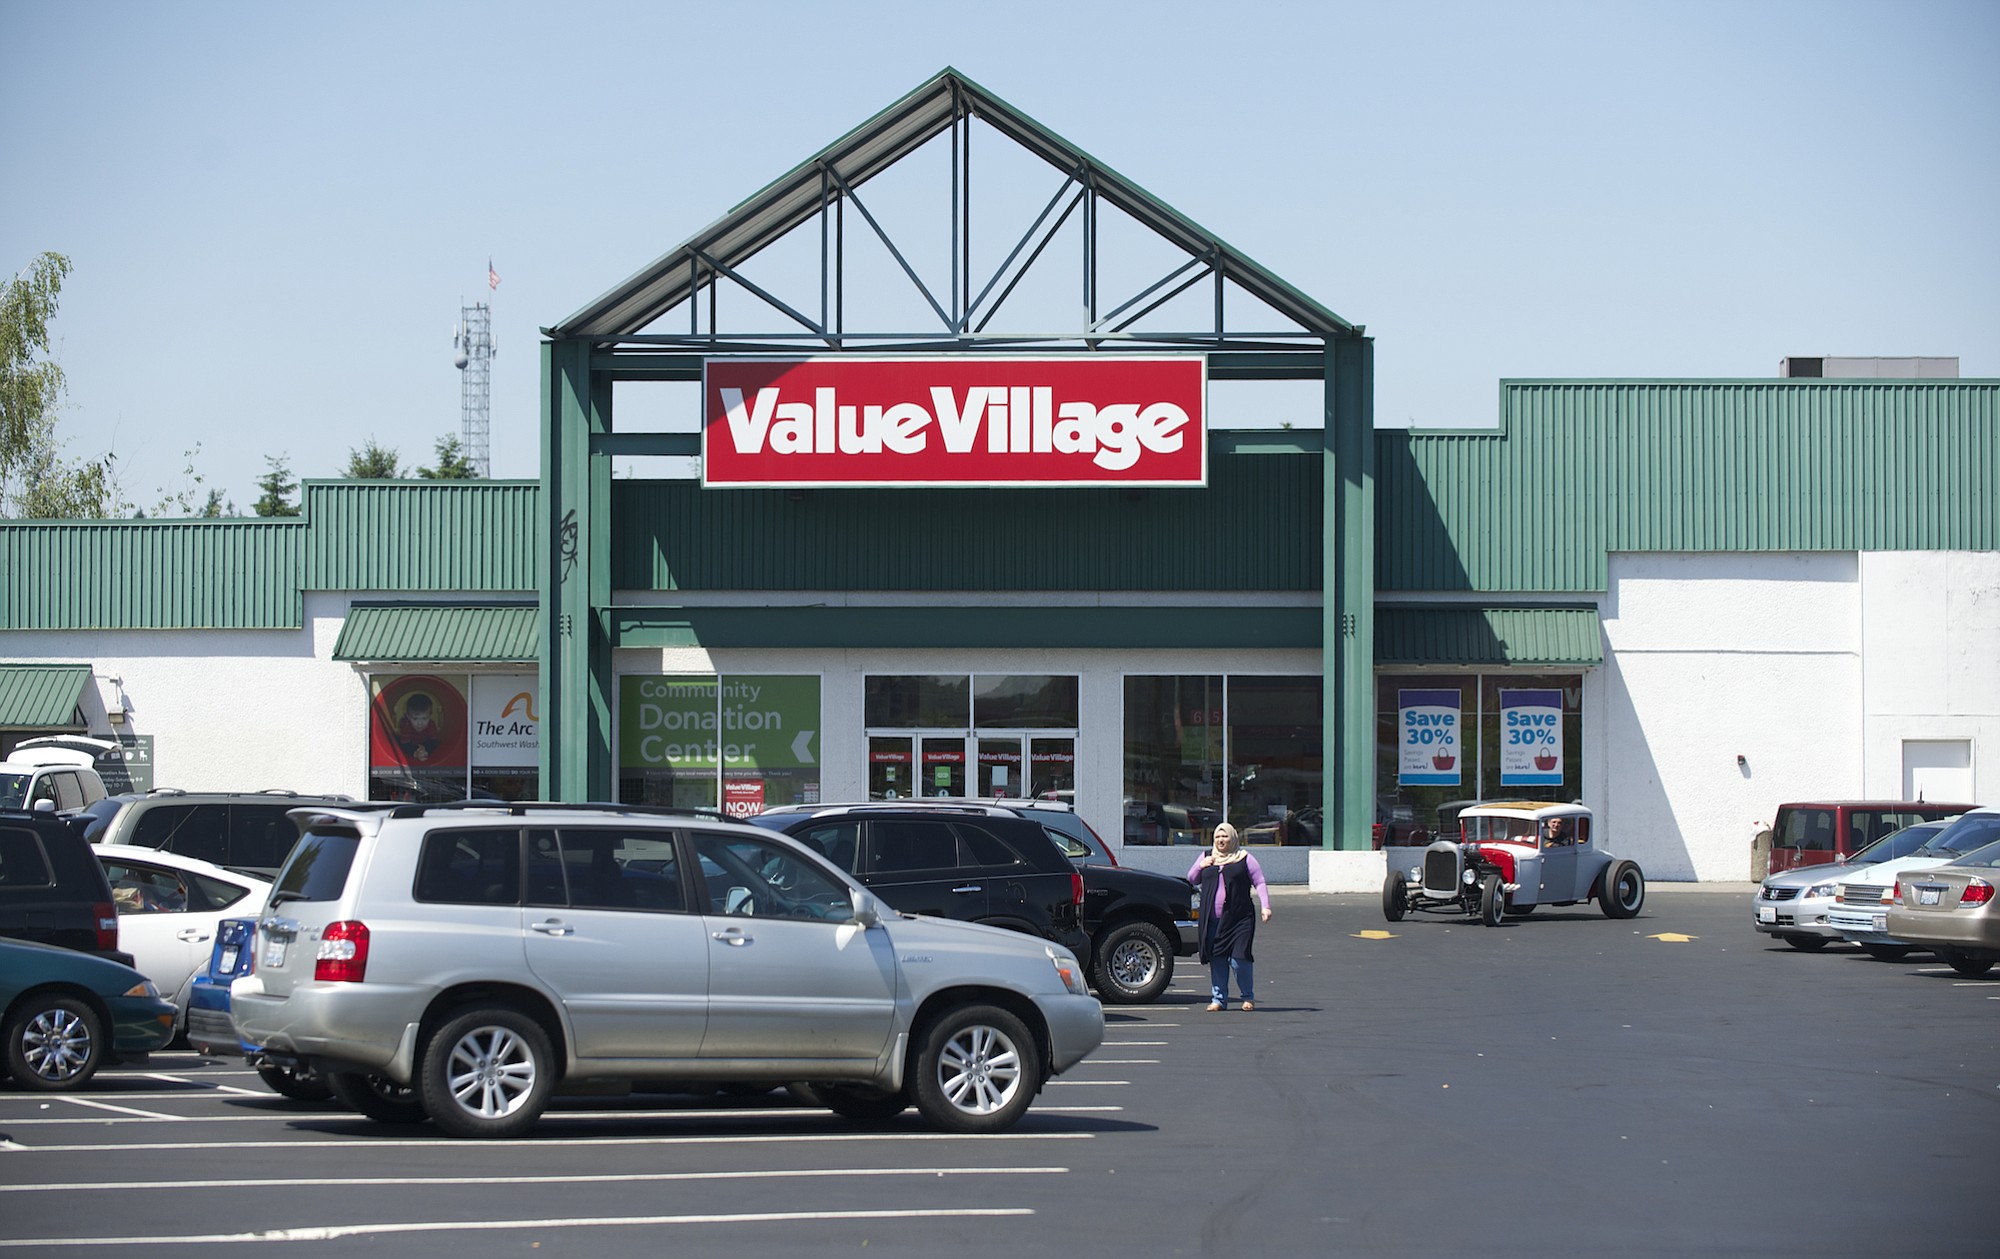 Dick Hannah Collision Center proposes to expand its services to the building which currently houses thrift store Value Village.